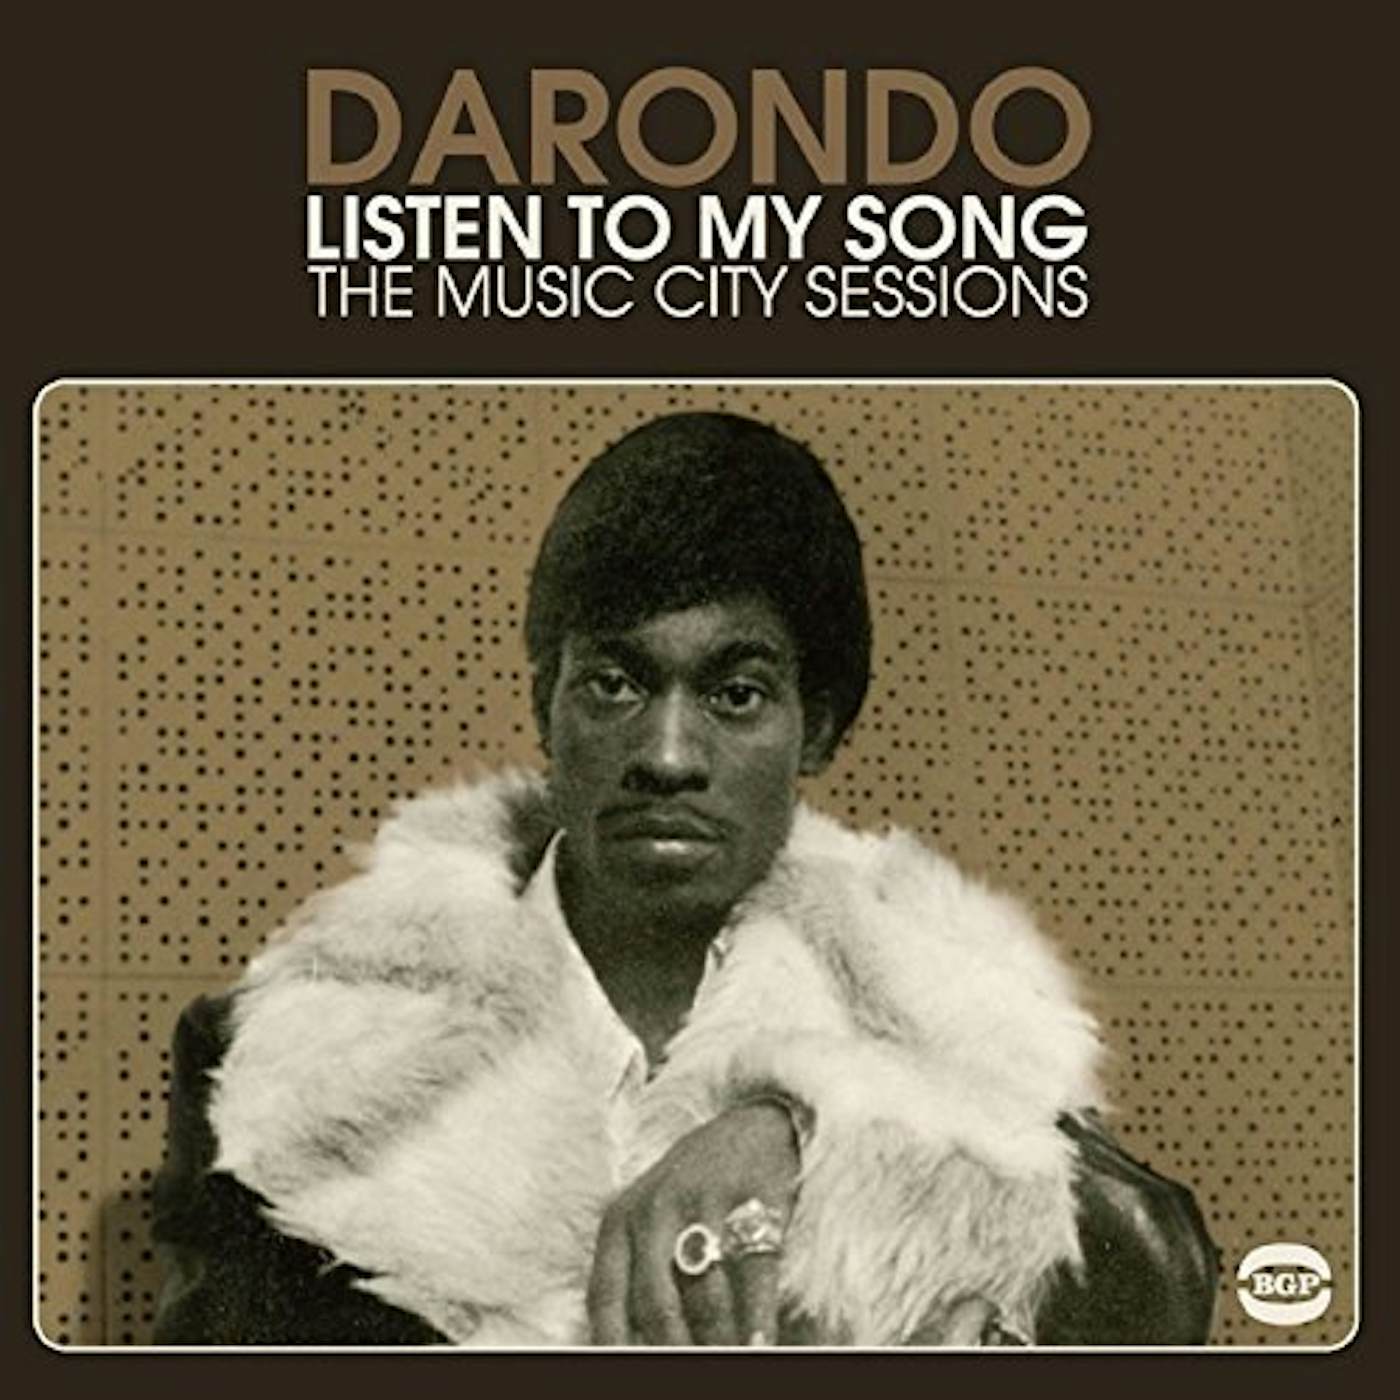 Darondo Listen to My Song: The Music City Sessions Vinyl Record